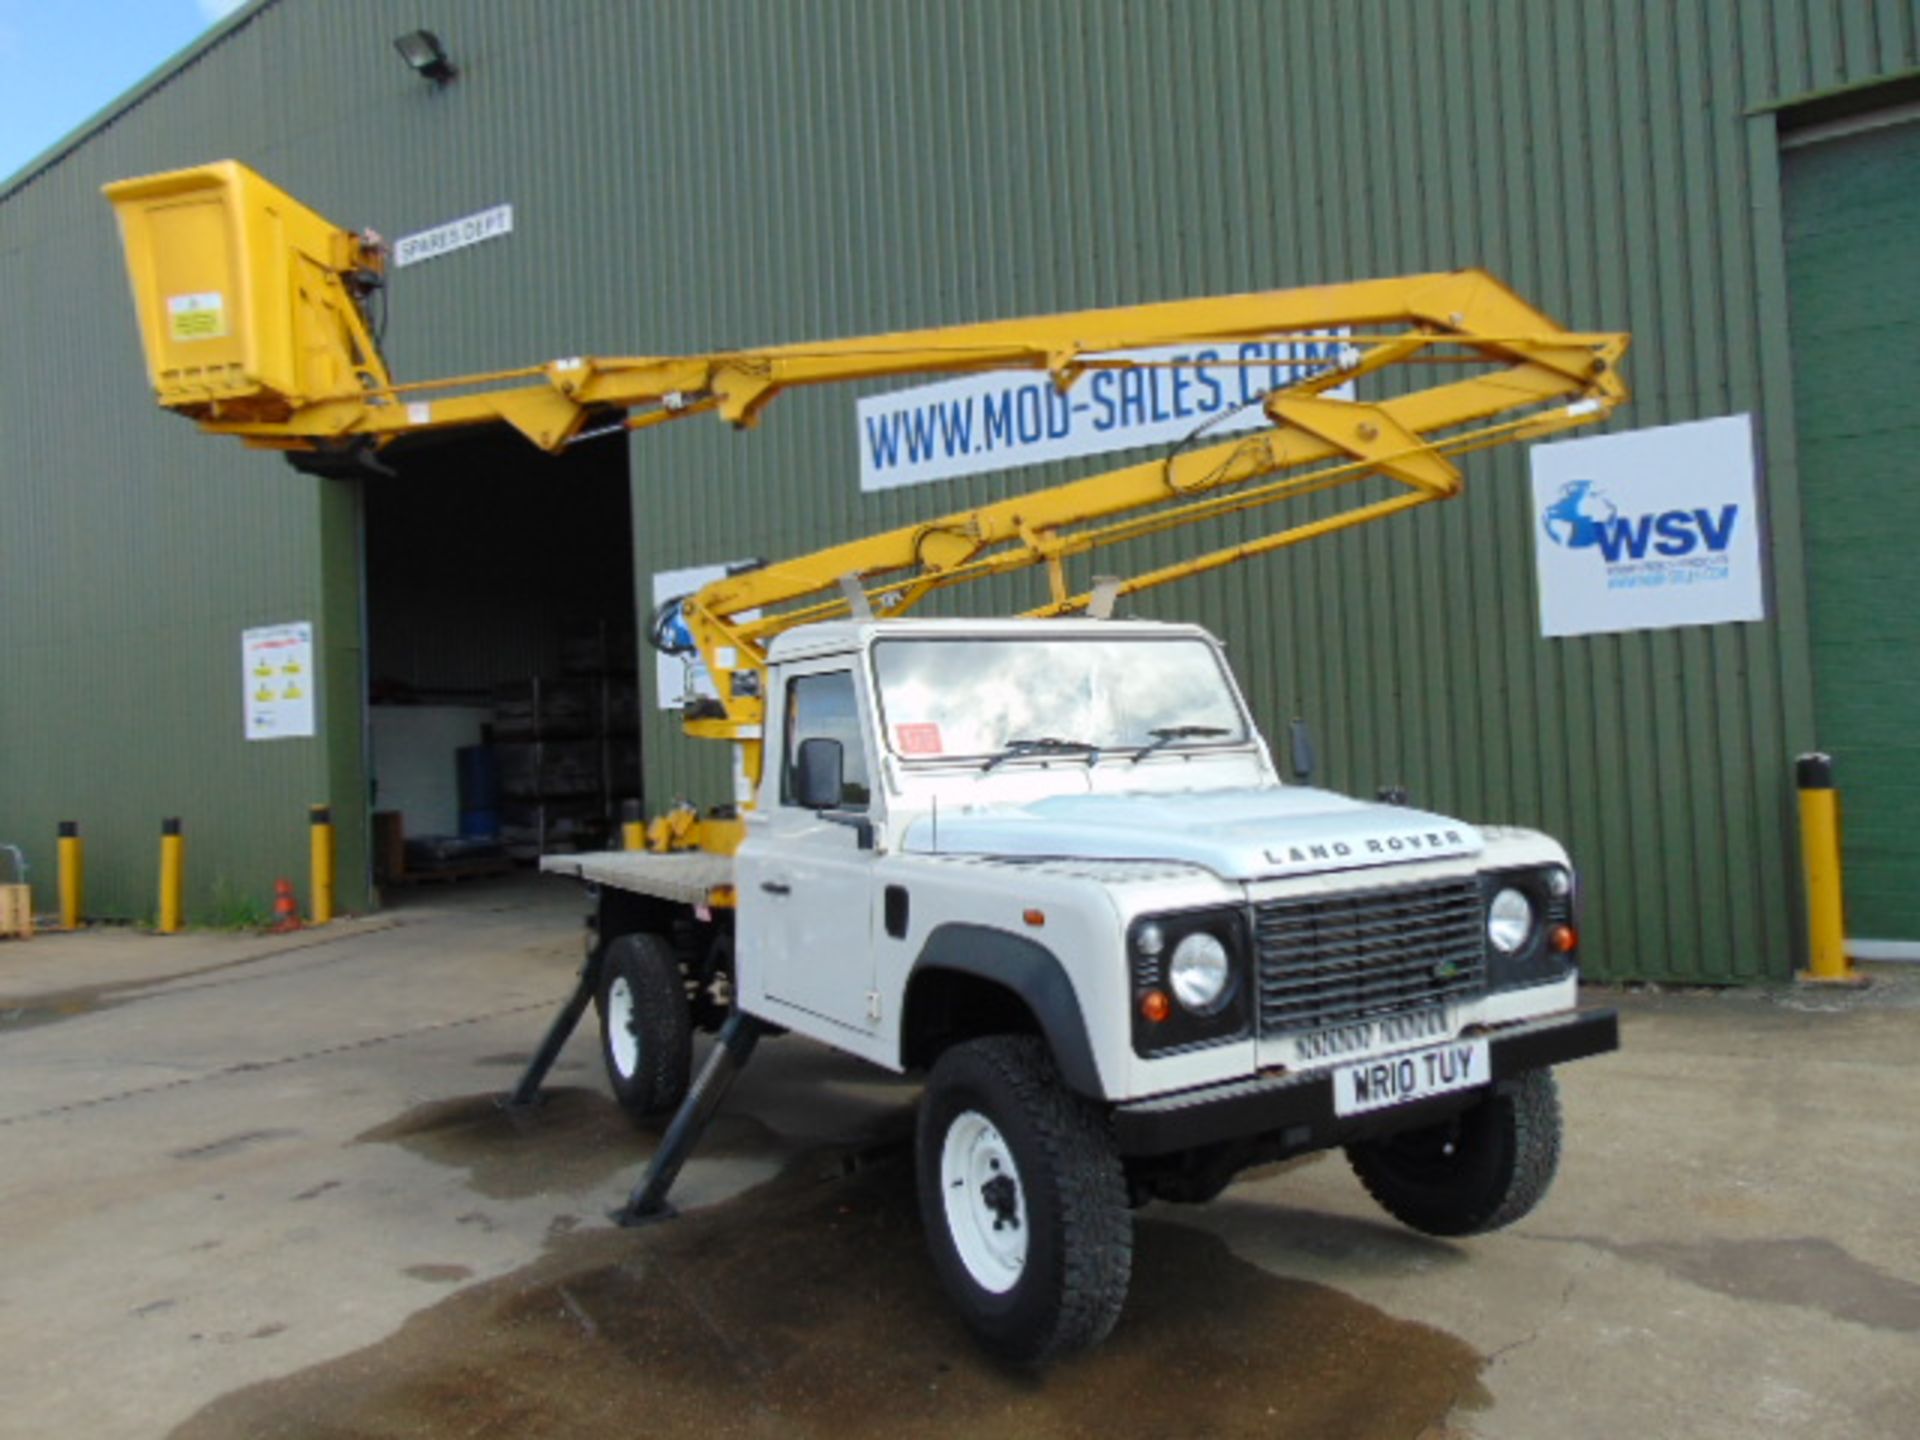 2010 Land Rover Defender 130 2.4 Puma Cherry Picker / Access Lift ONLY 83,760 MILES! - Image 2 of 32